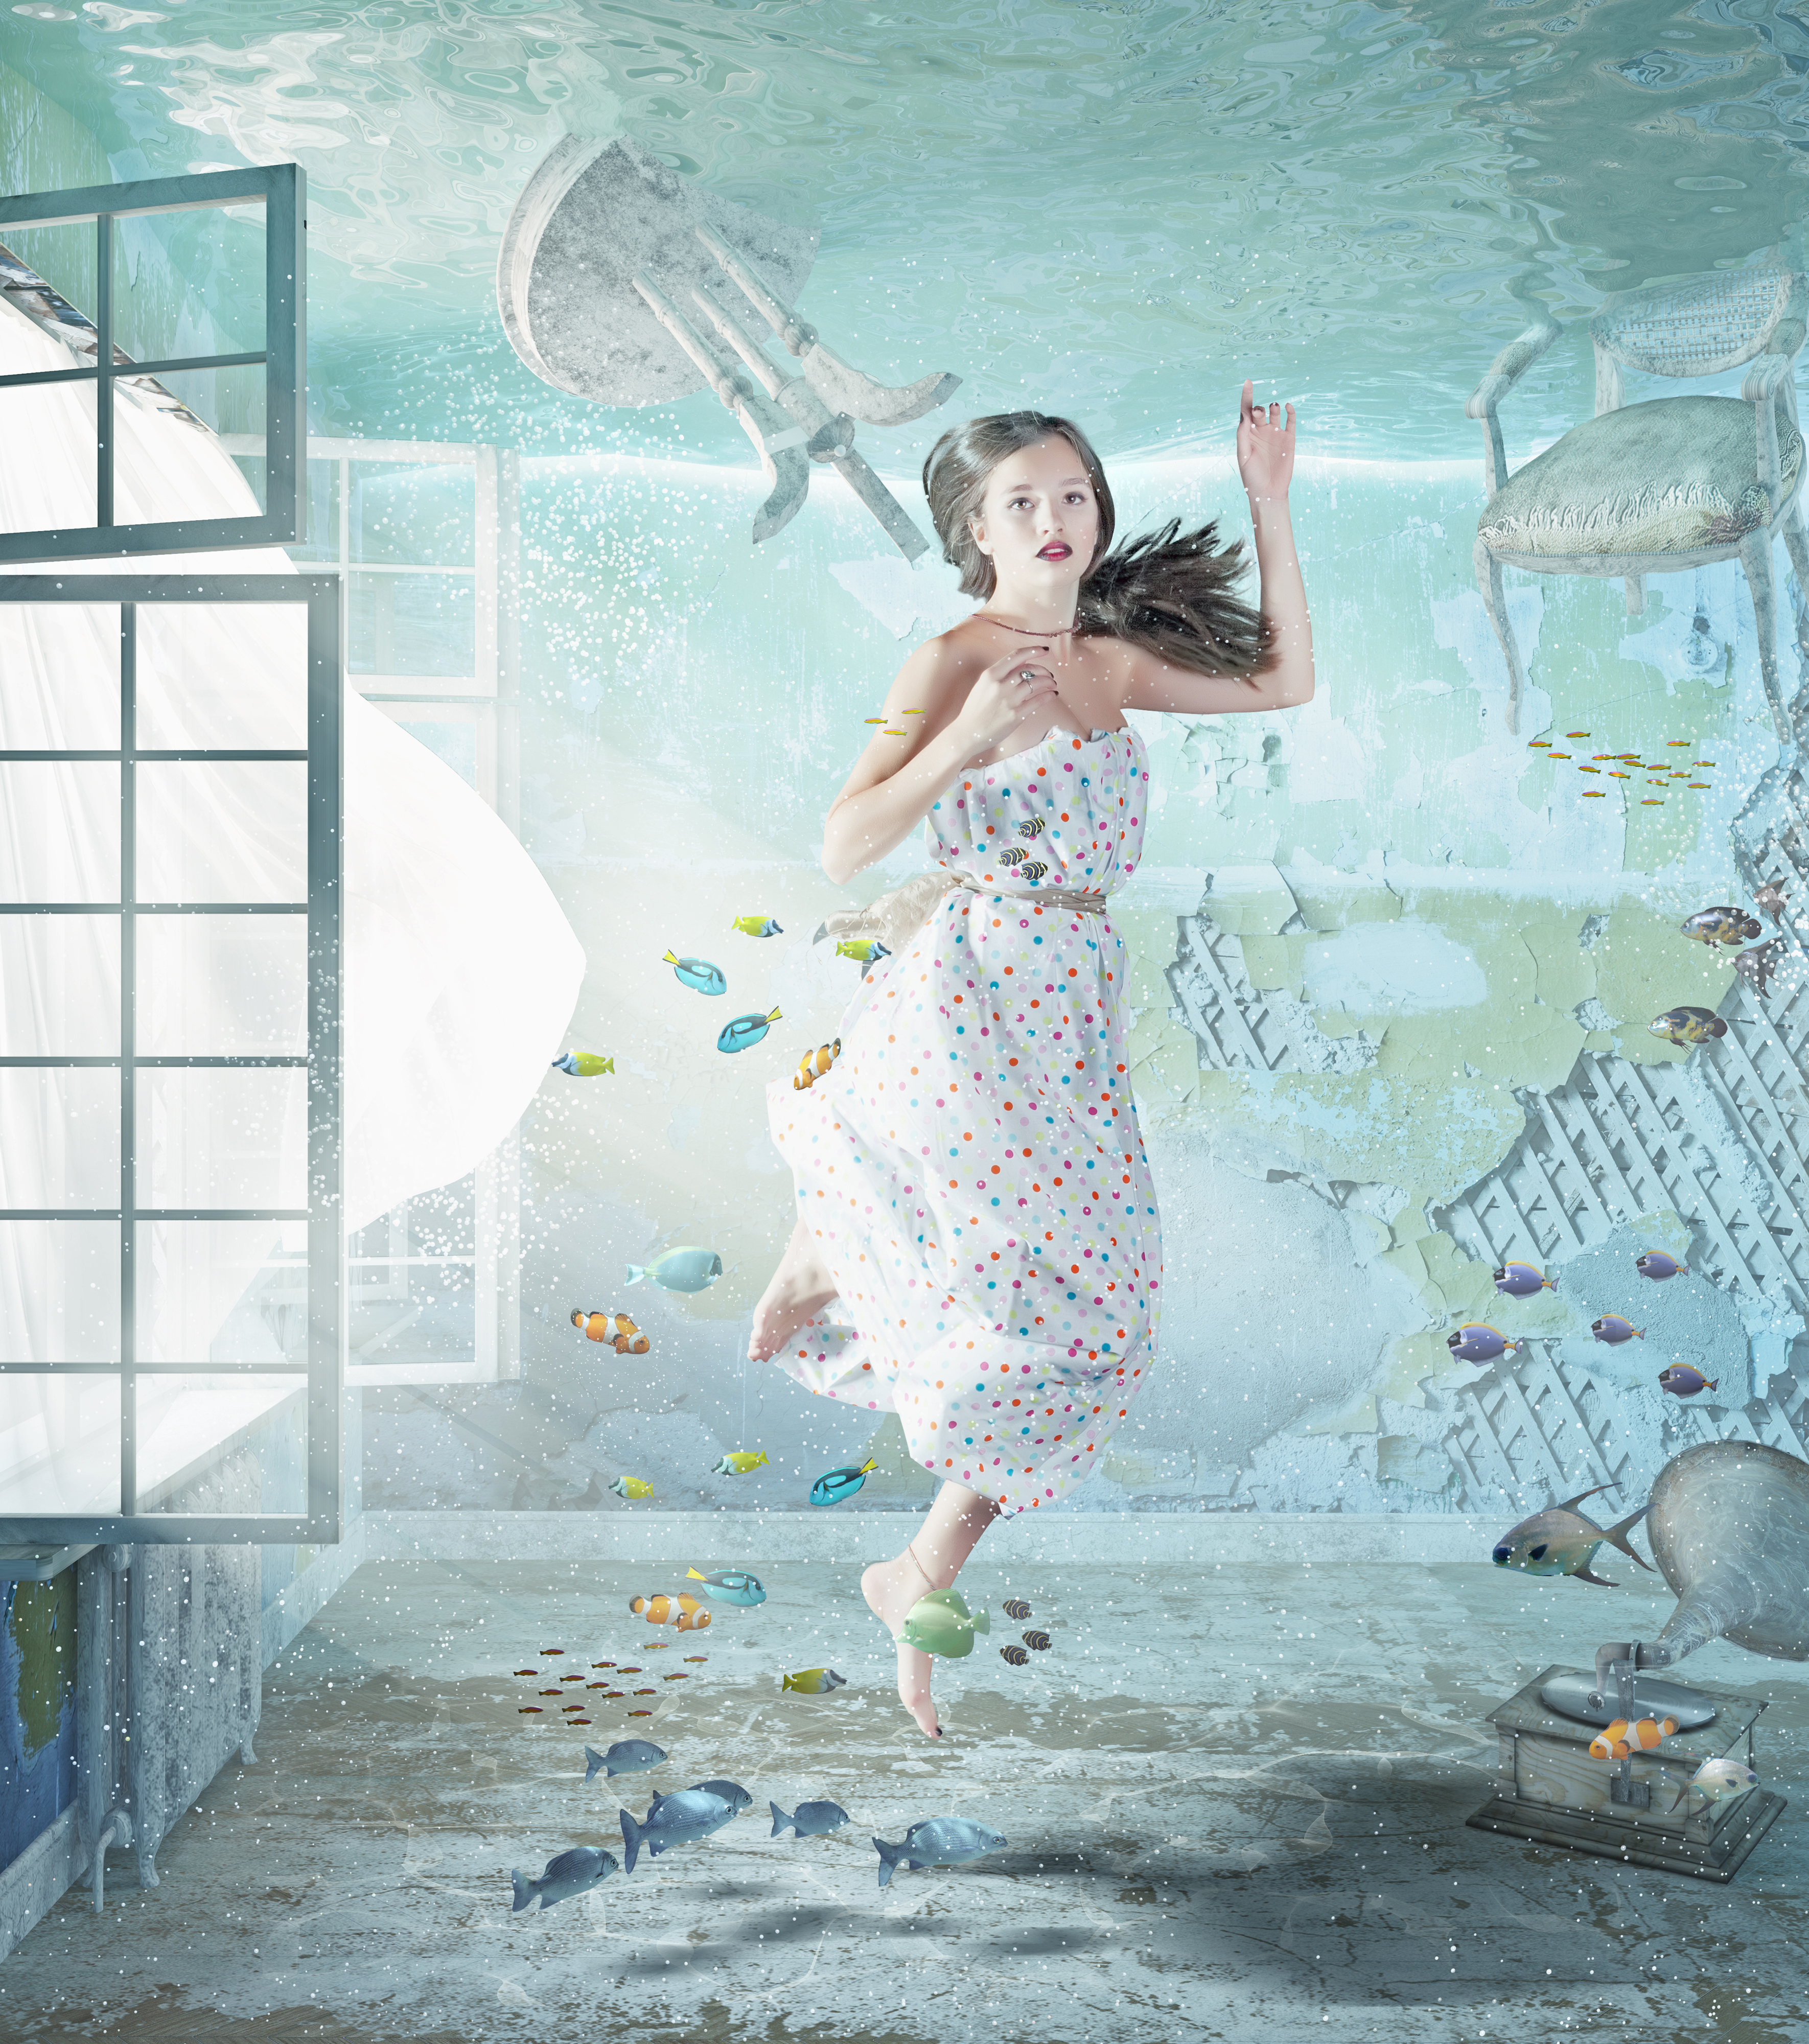 the young beautiful girl underwater in the flooded interior. creative concept